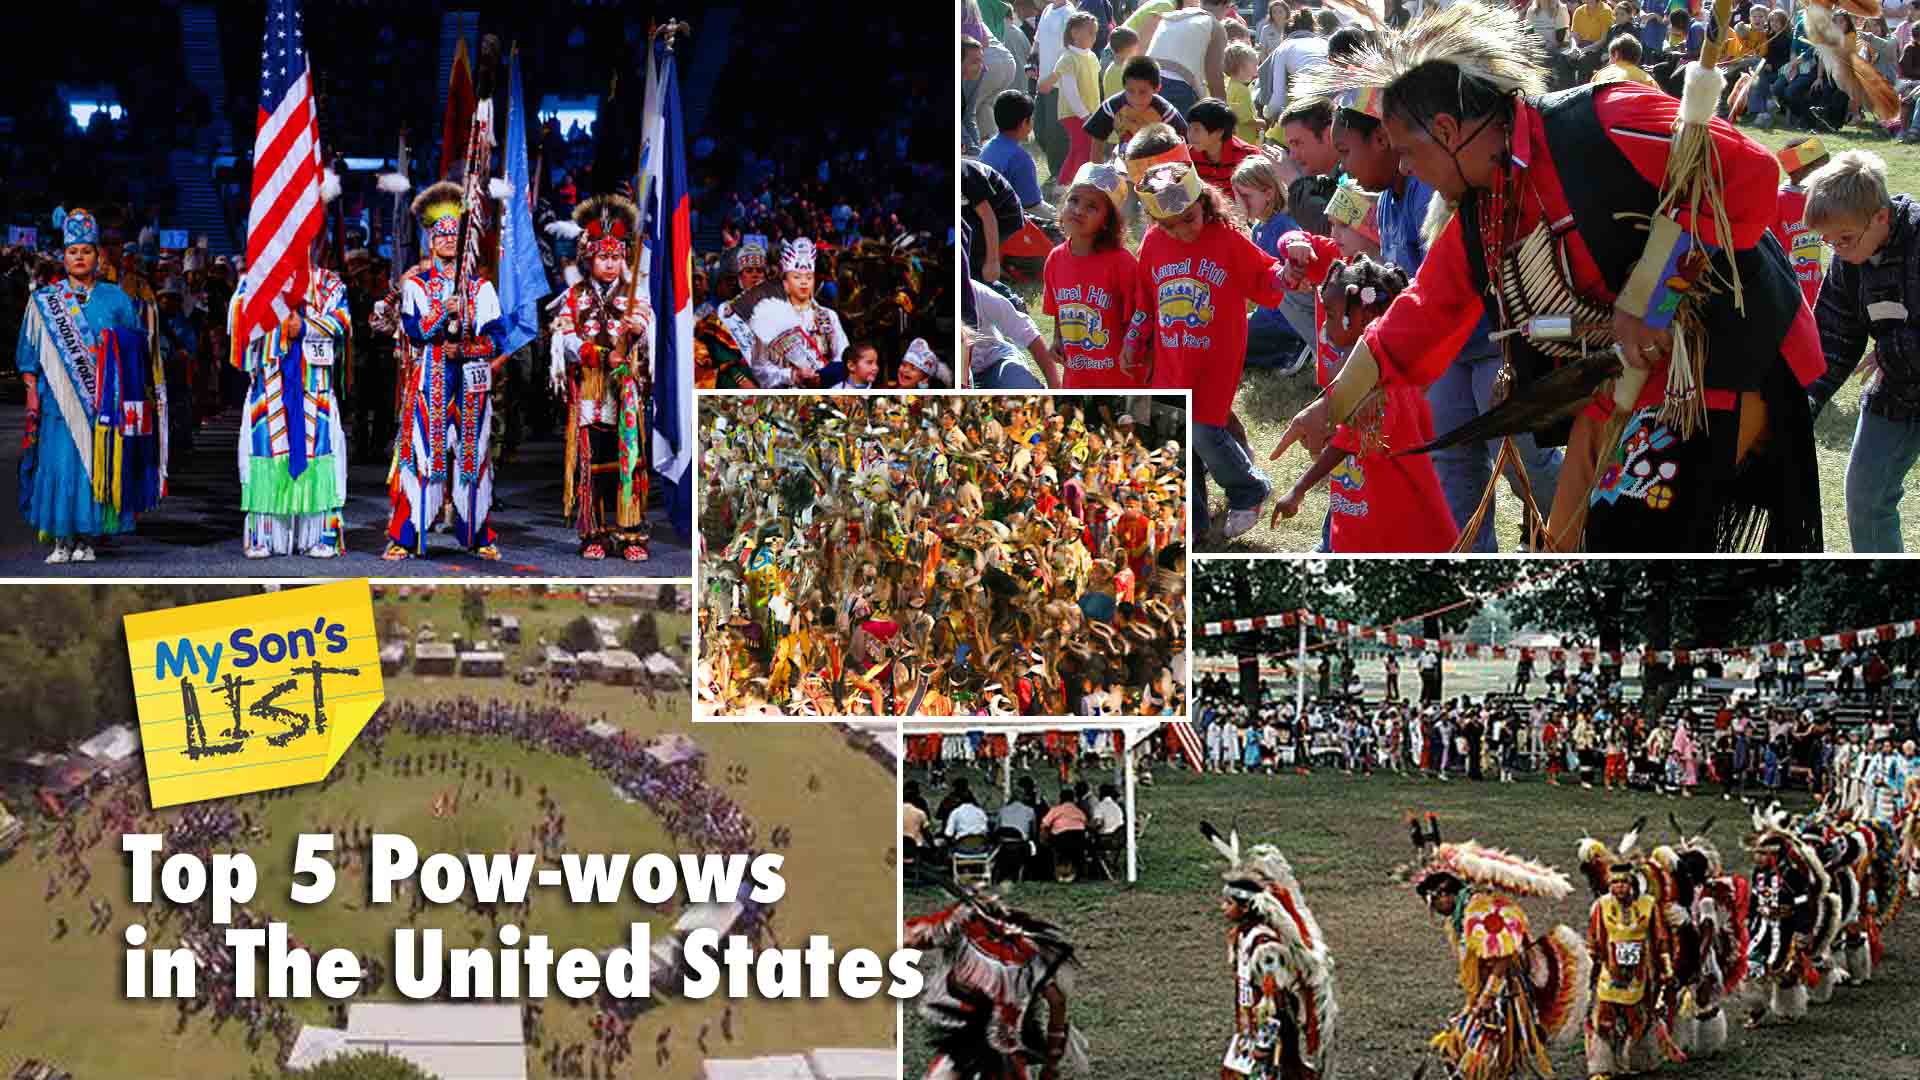 Top 5 Pow-Wows In the United States